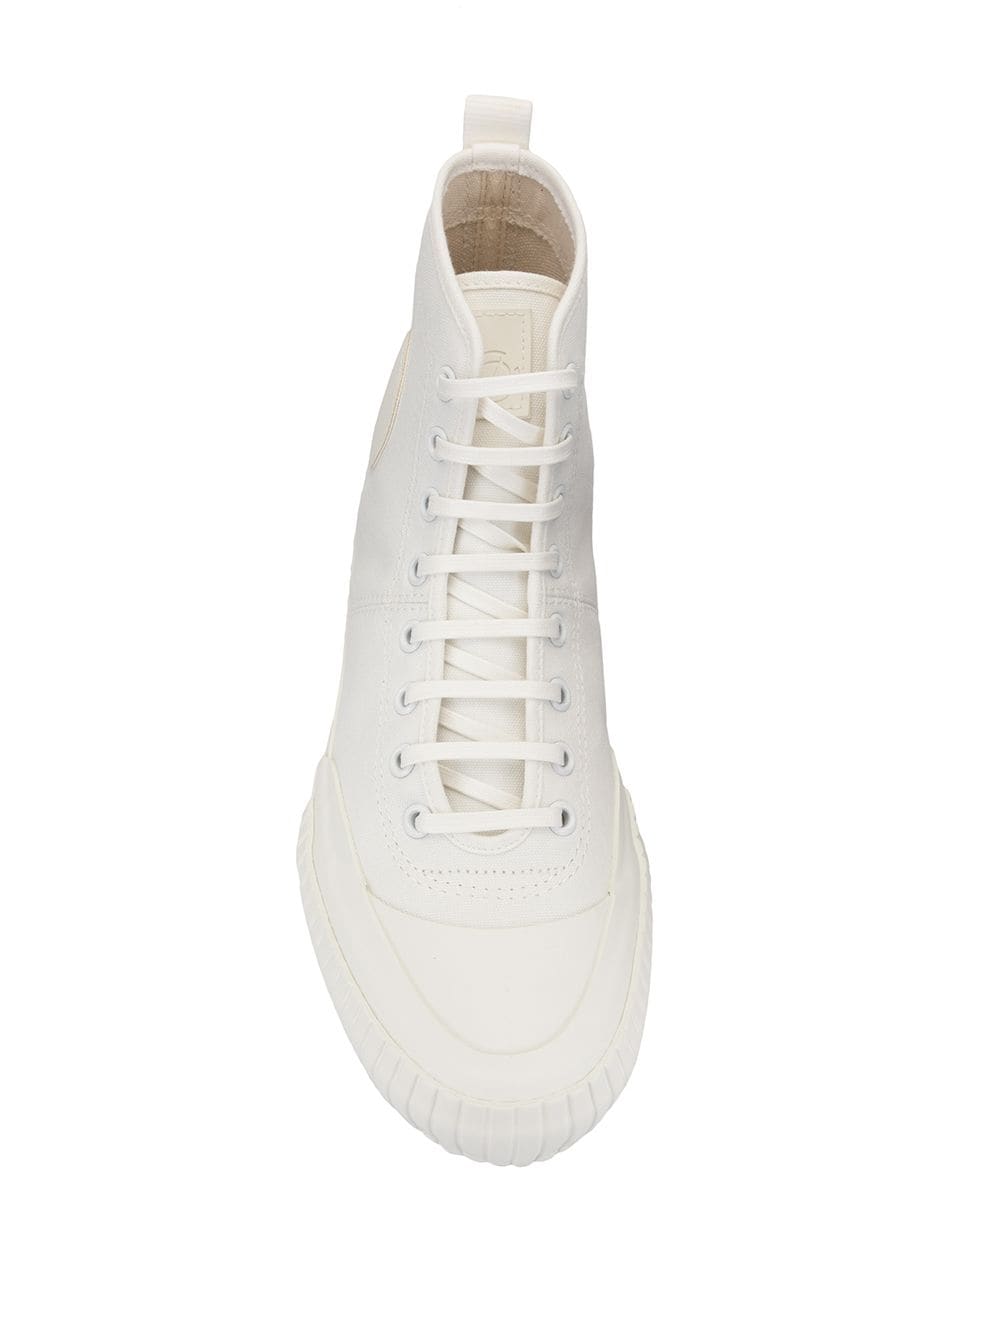 3.1 Phillip Lim Charlie high-top Sneakers - Farfetch